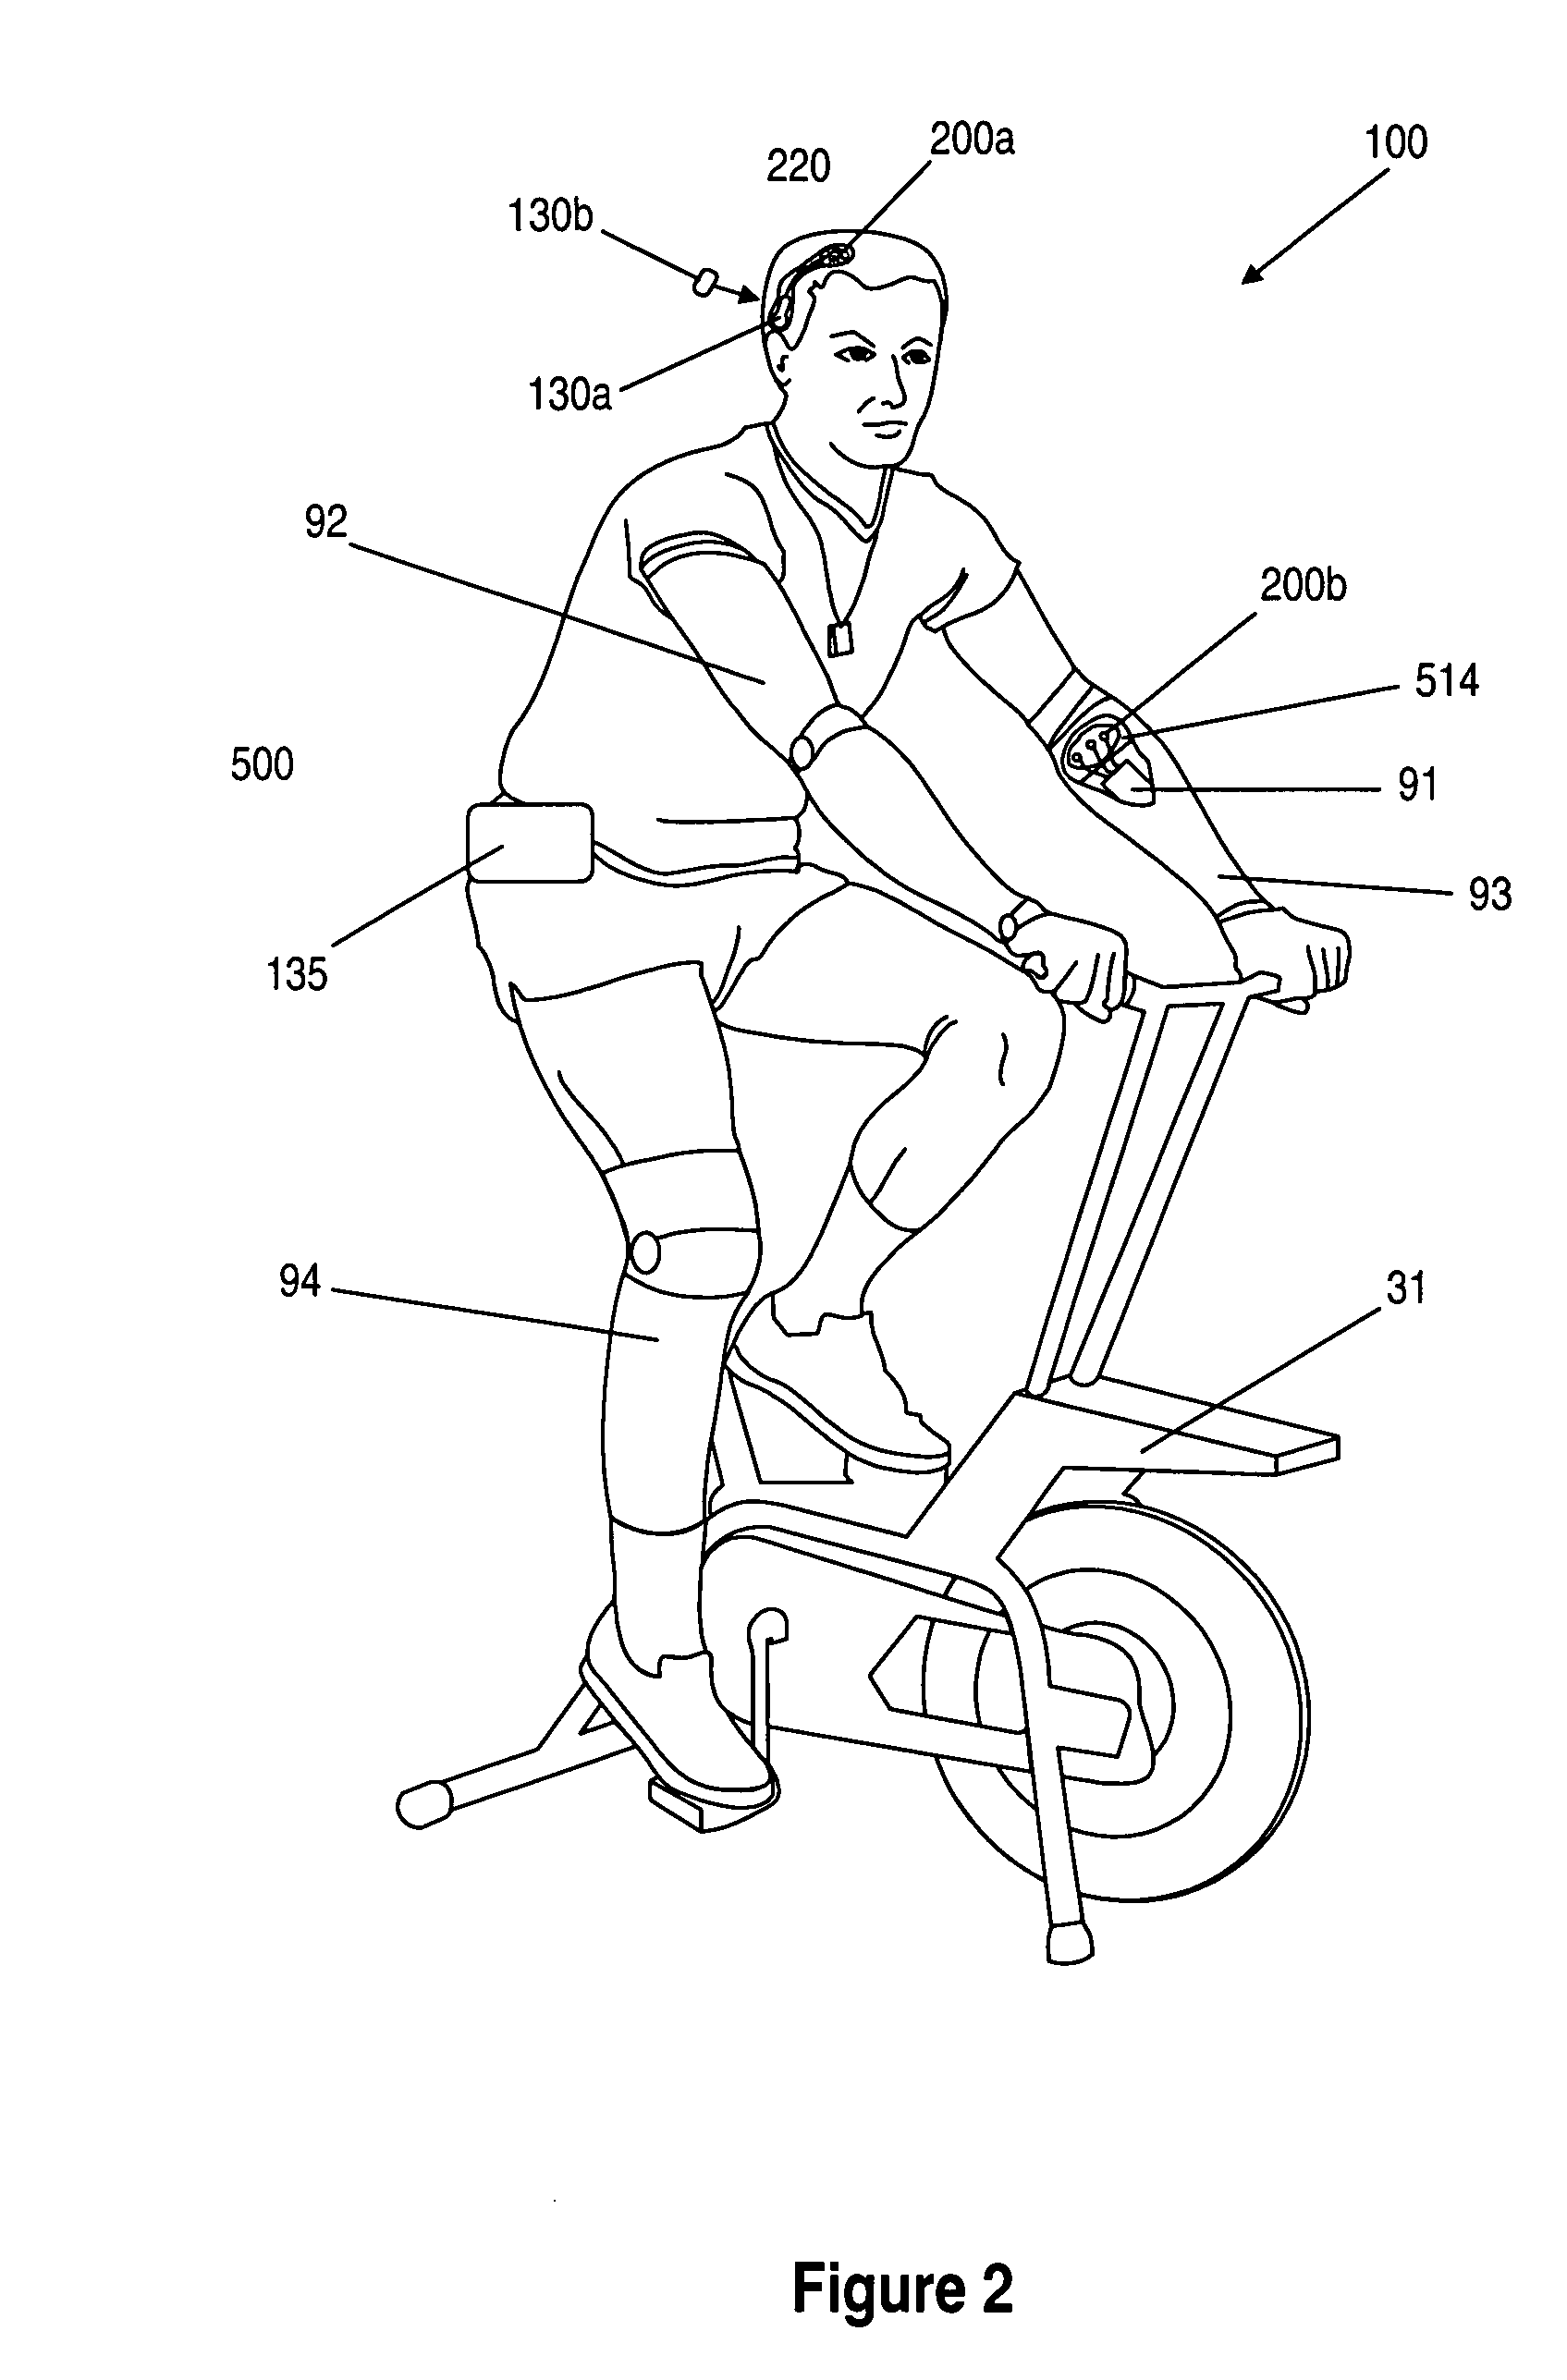 Joint movement apparatus